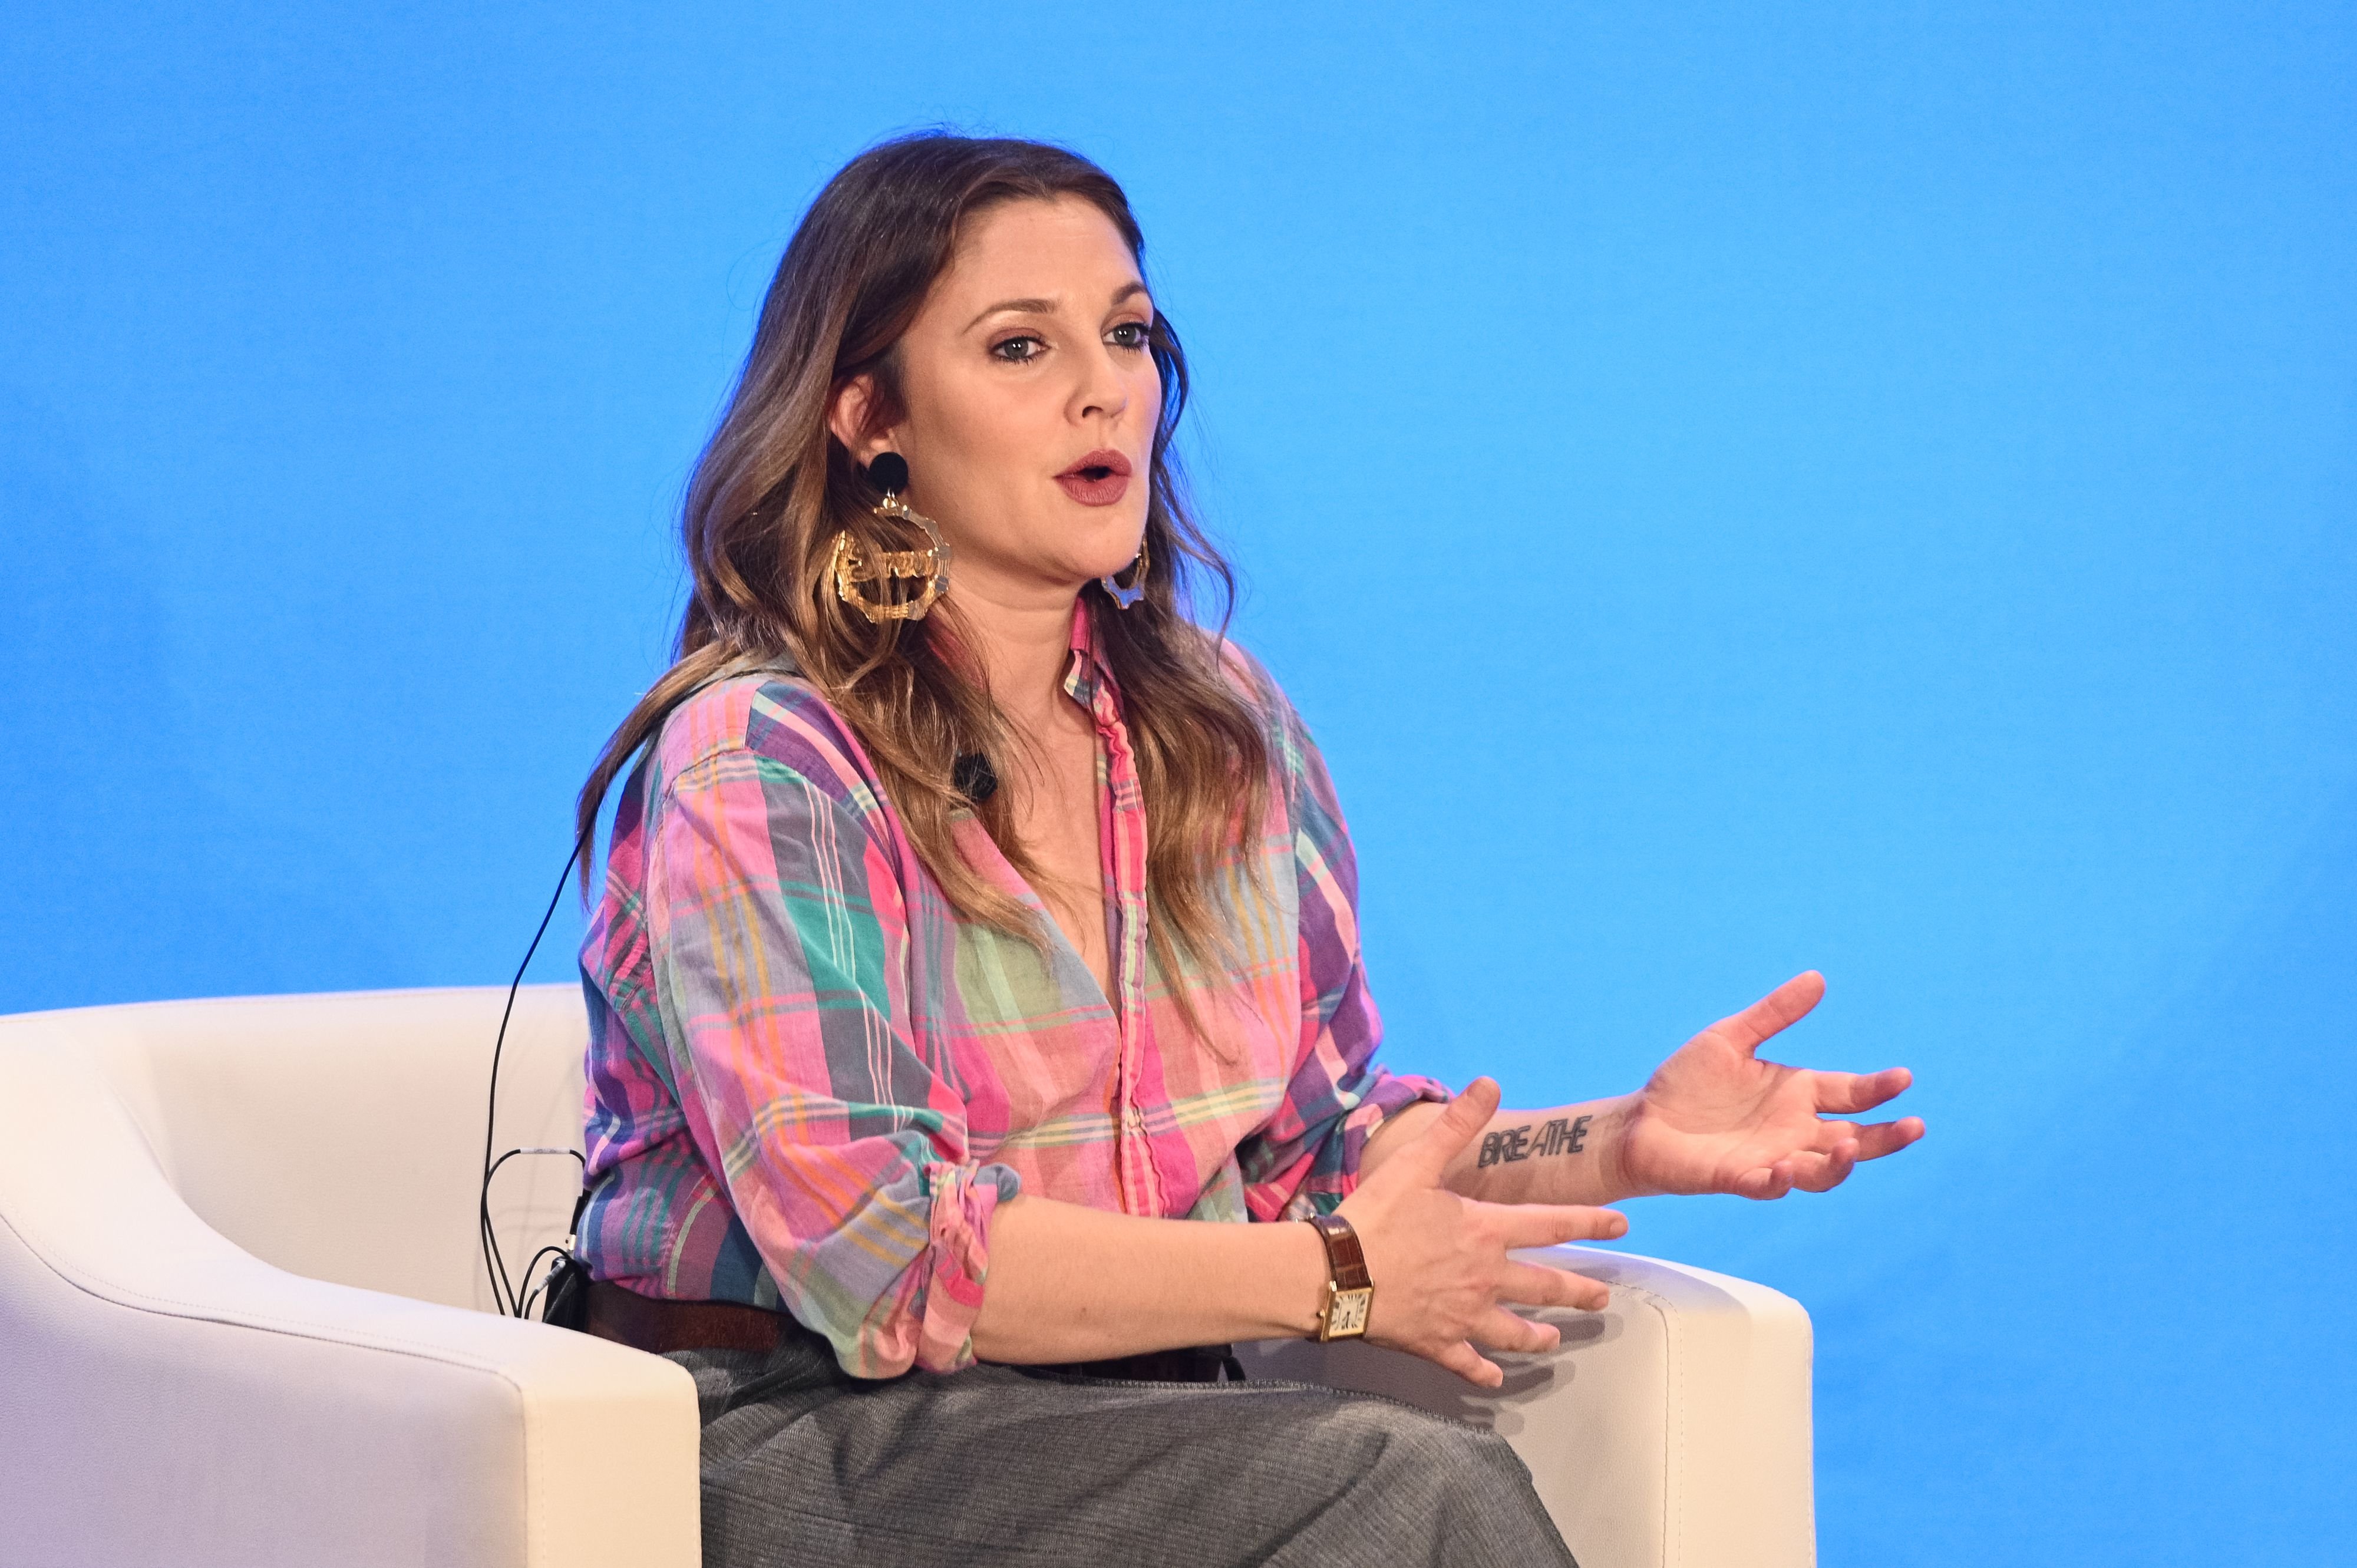 Drew Barrymore speaks onstage at WeWork New York City on May 15, 2019 | Photo: Getty Images